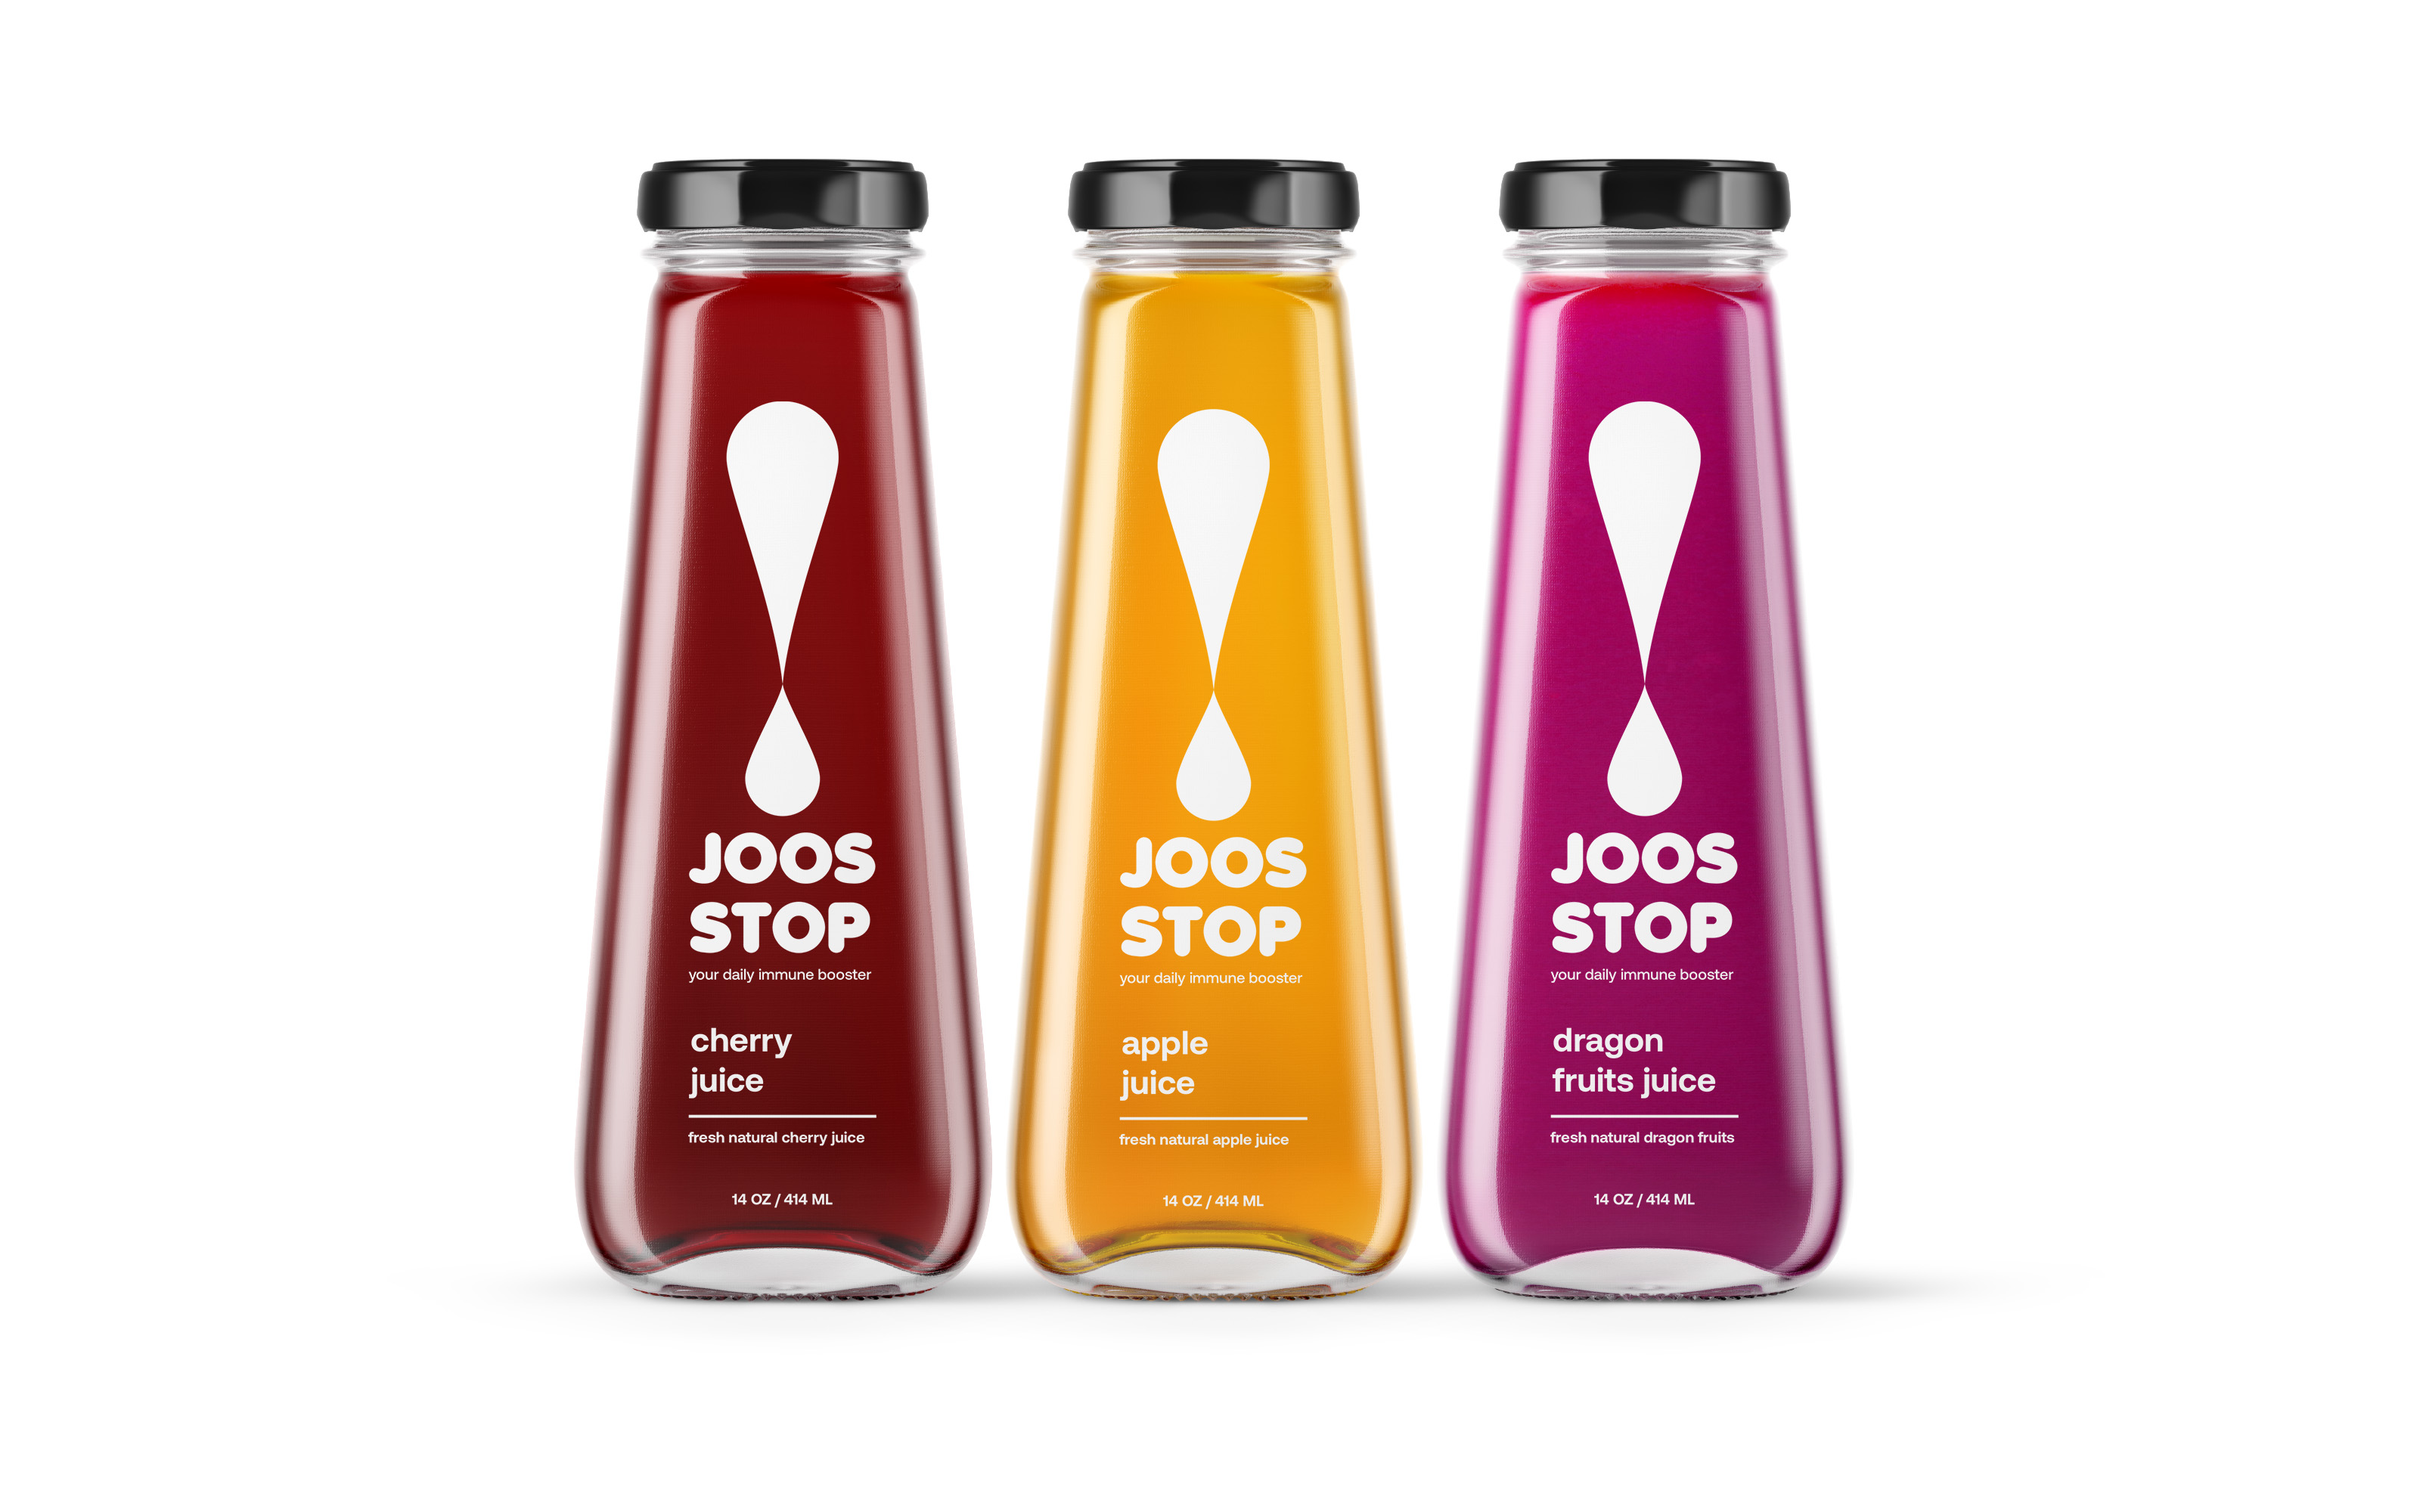 Widarto Impact Designing Logo and Packaging for Joos Stop! Juices Drink